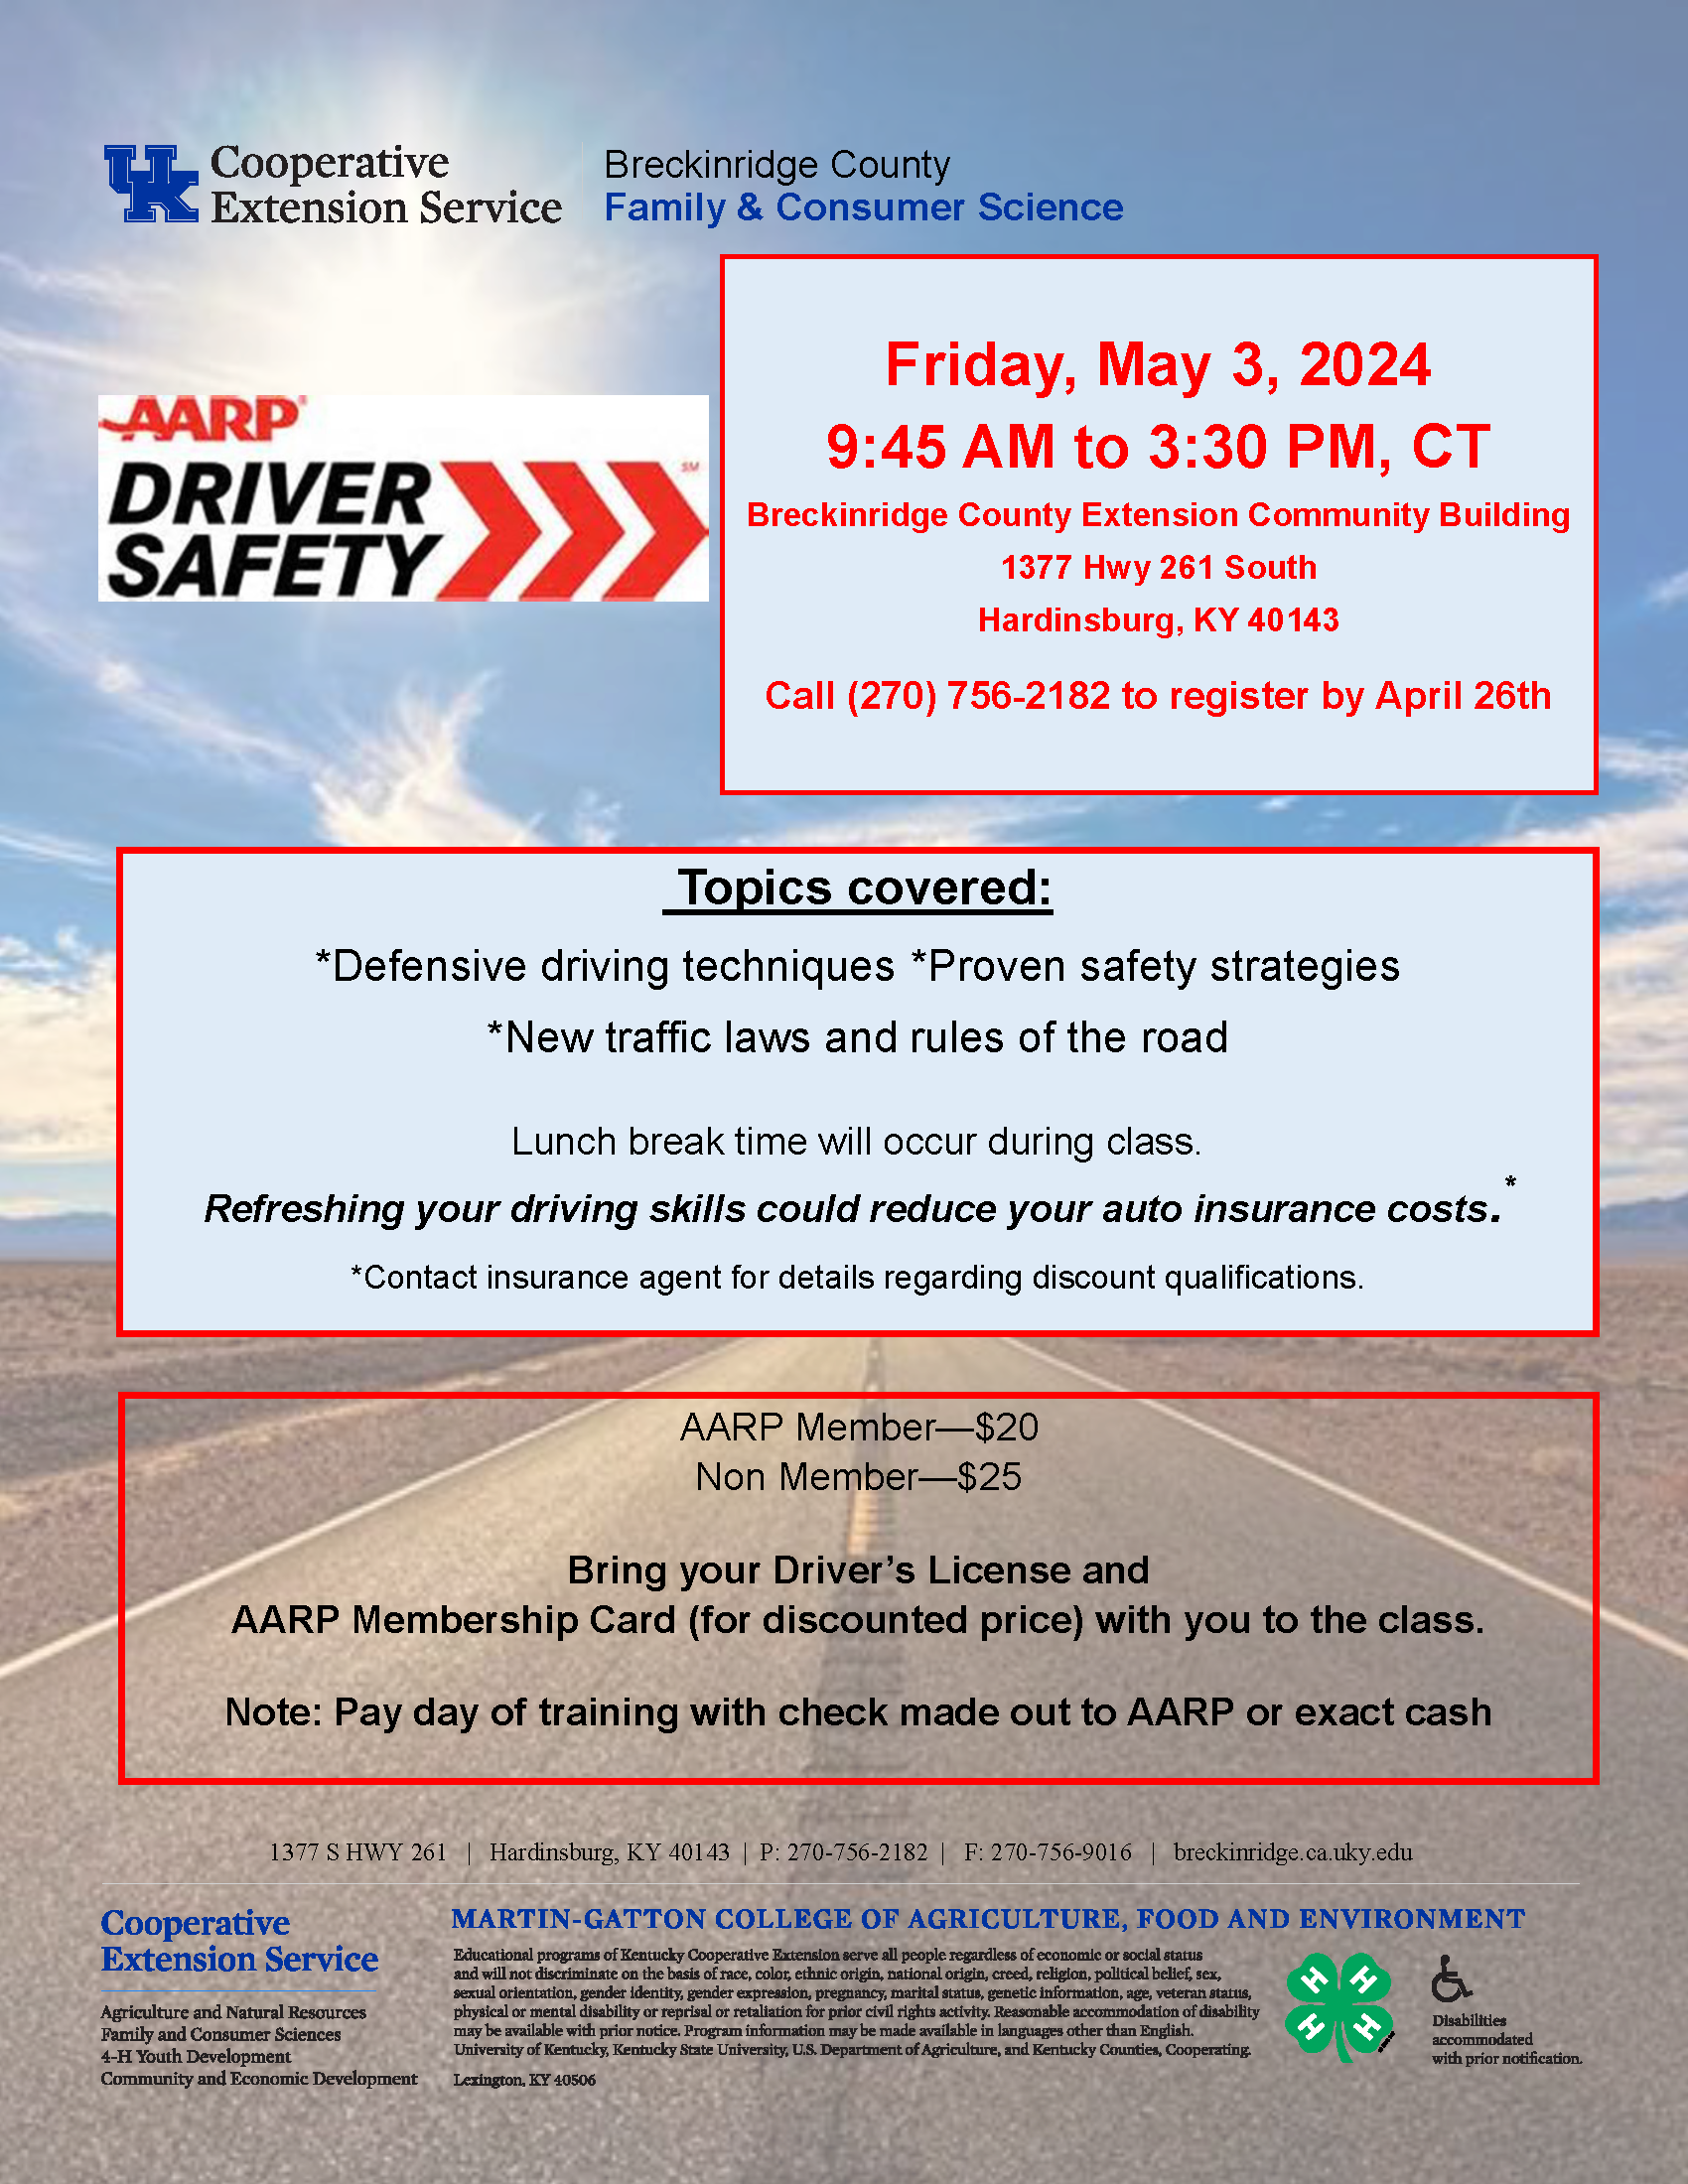 AARP Drivers Safety Flyer